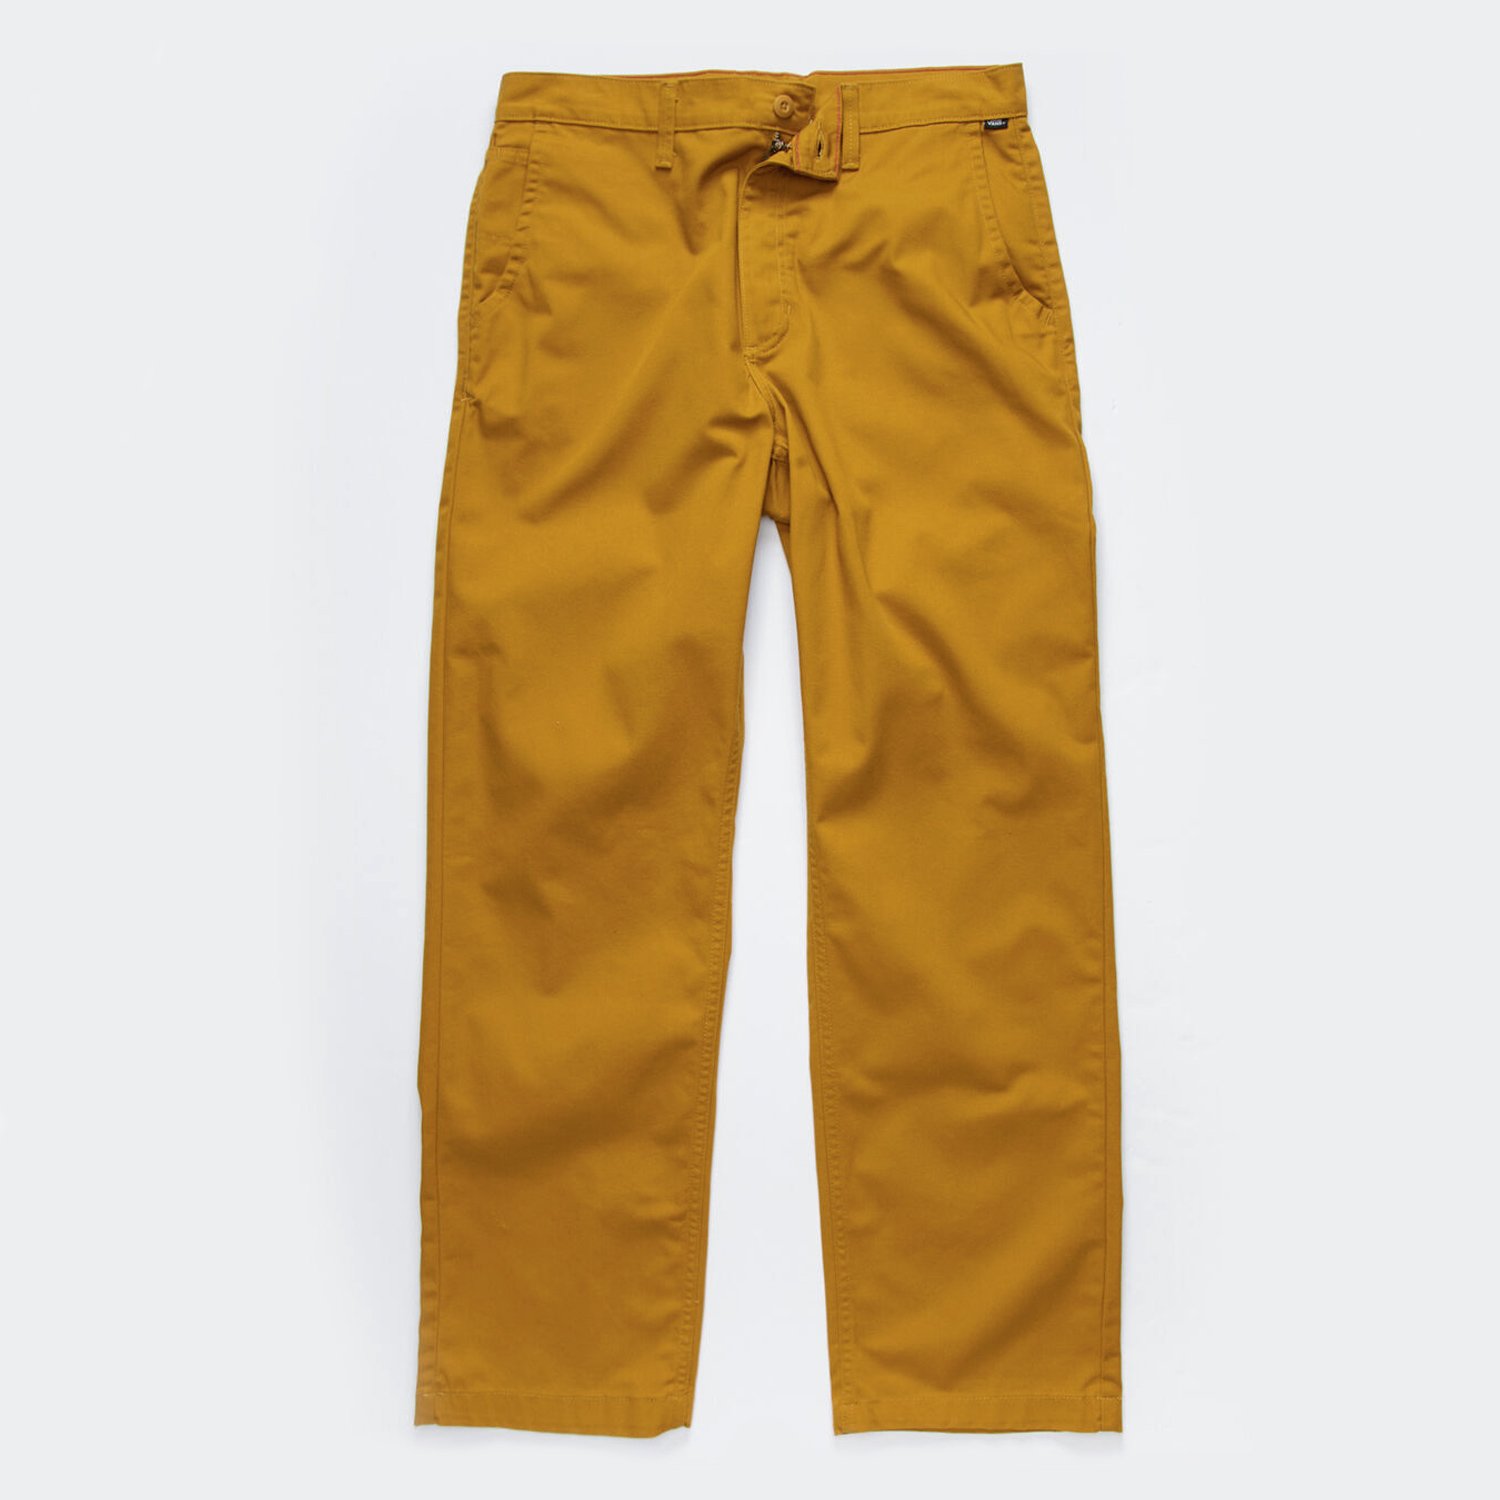 Authentic Chino Loose Pants